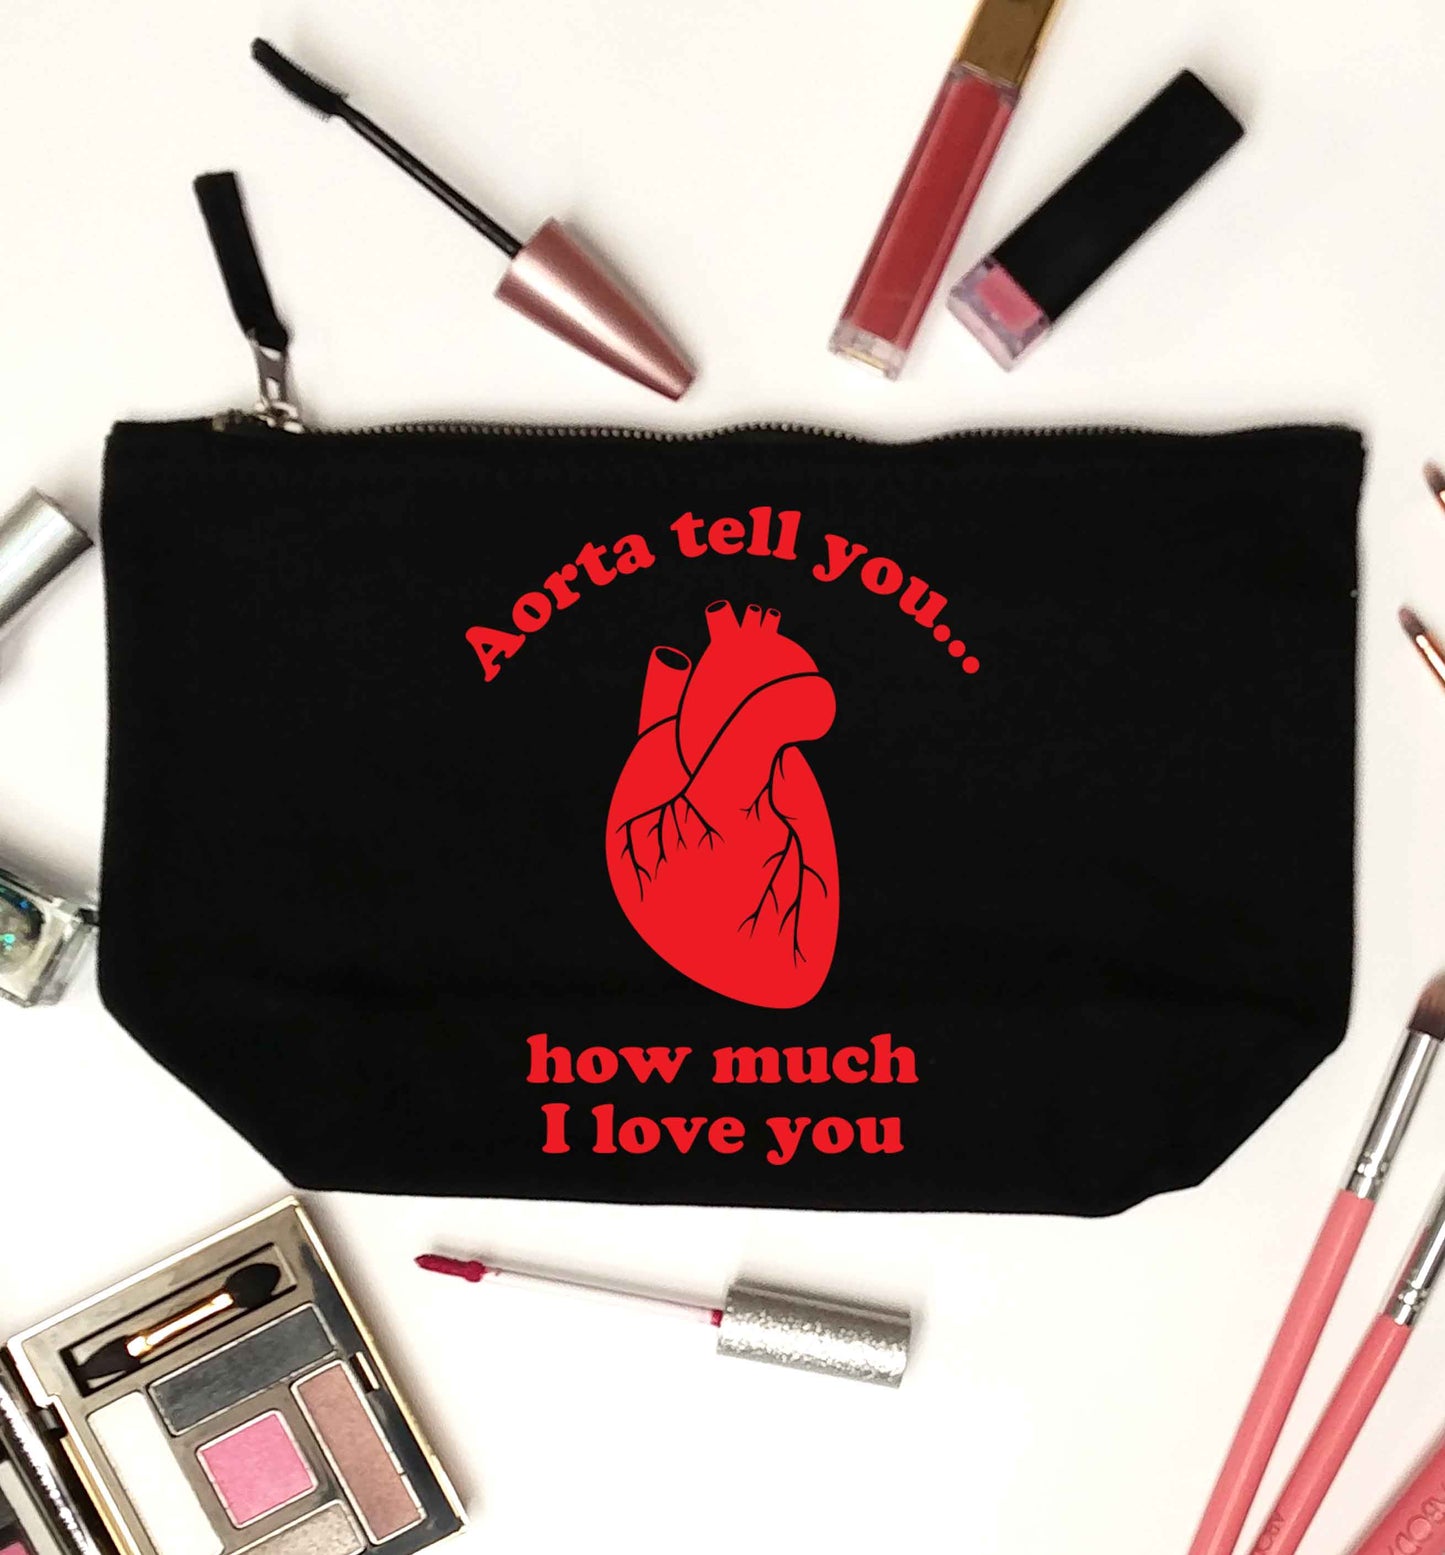 Aorta tell you how much I love you black makeup bag